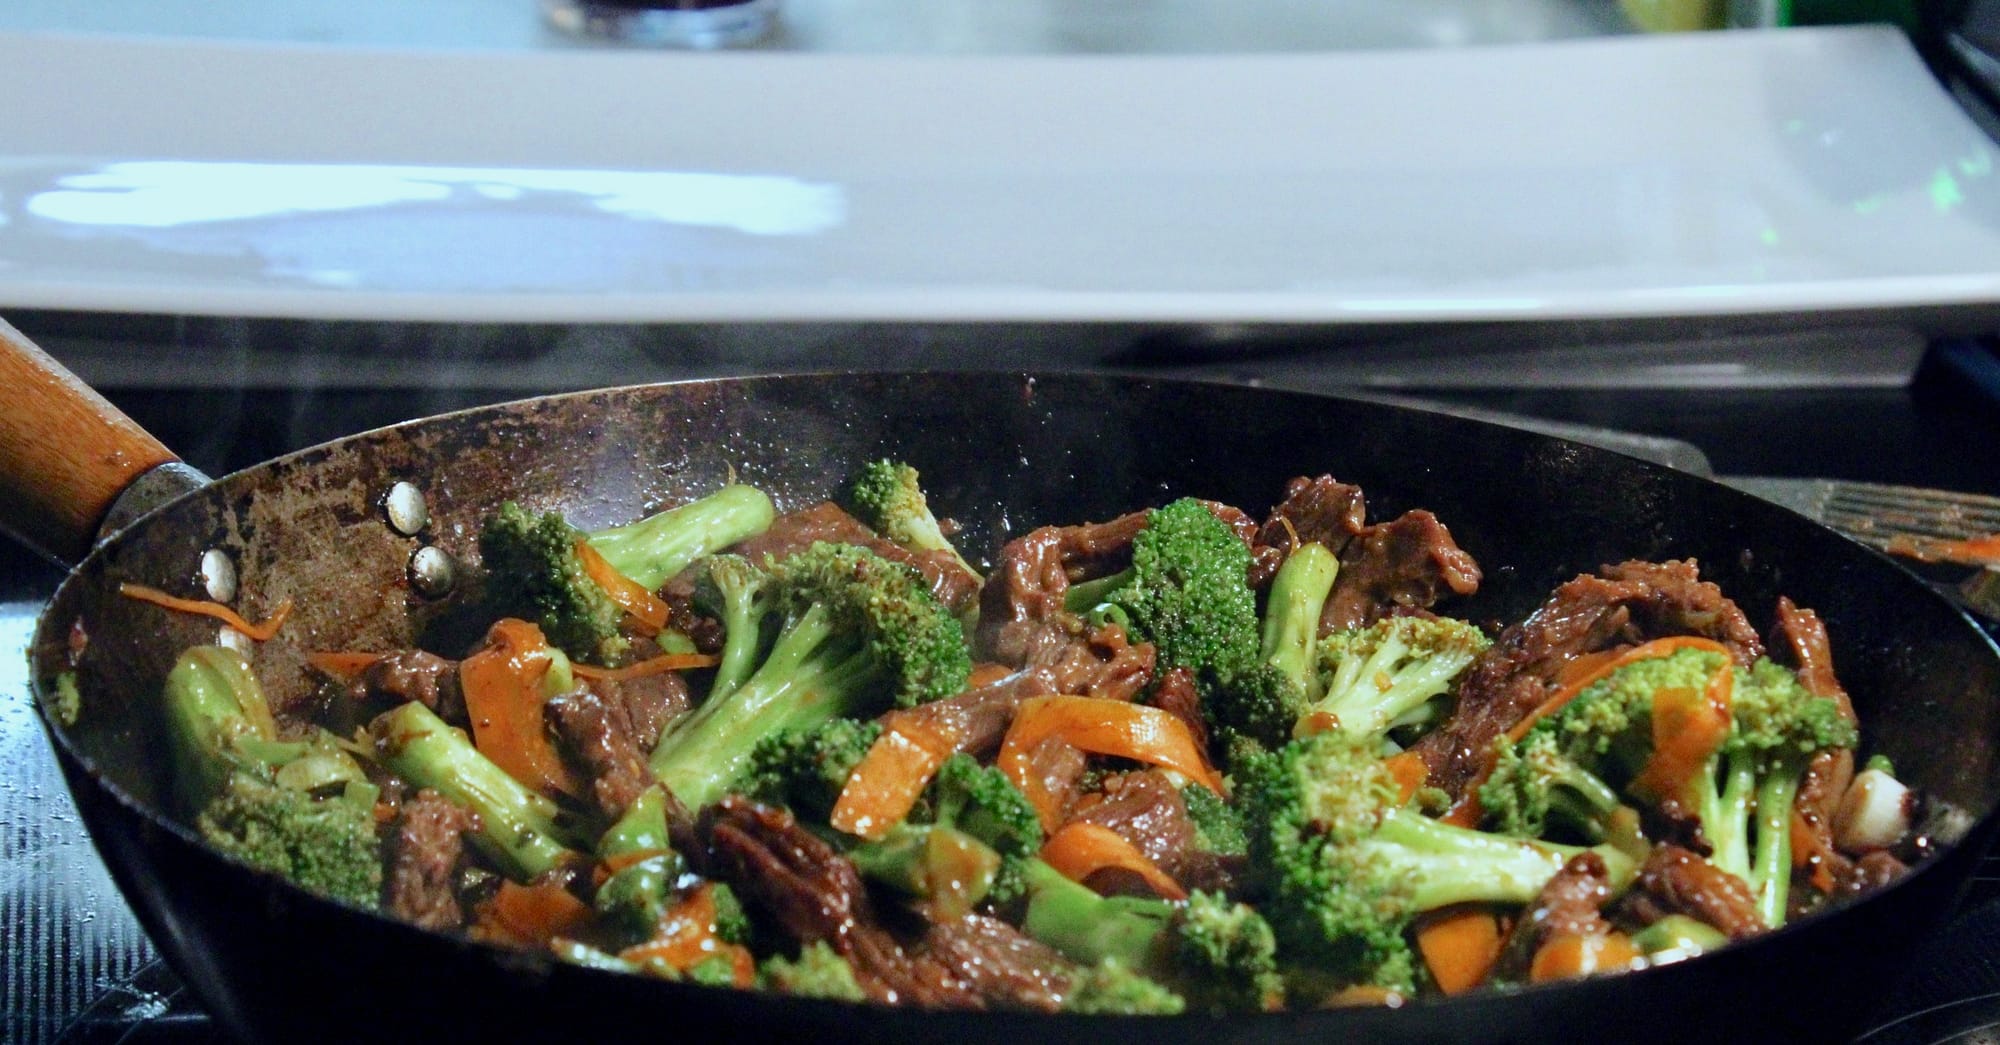 Completed beef with broccoli